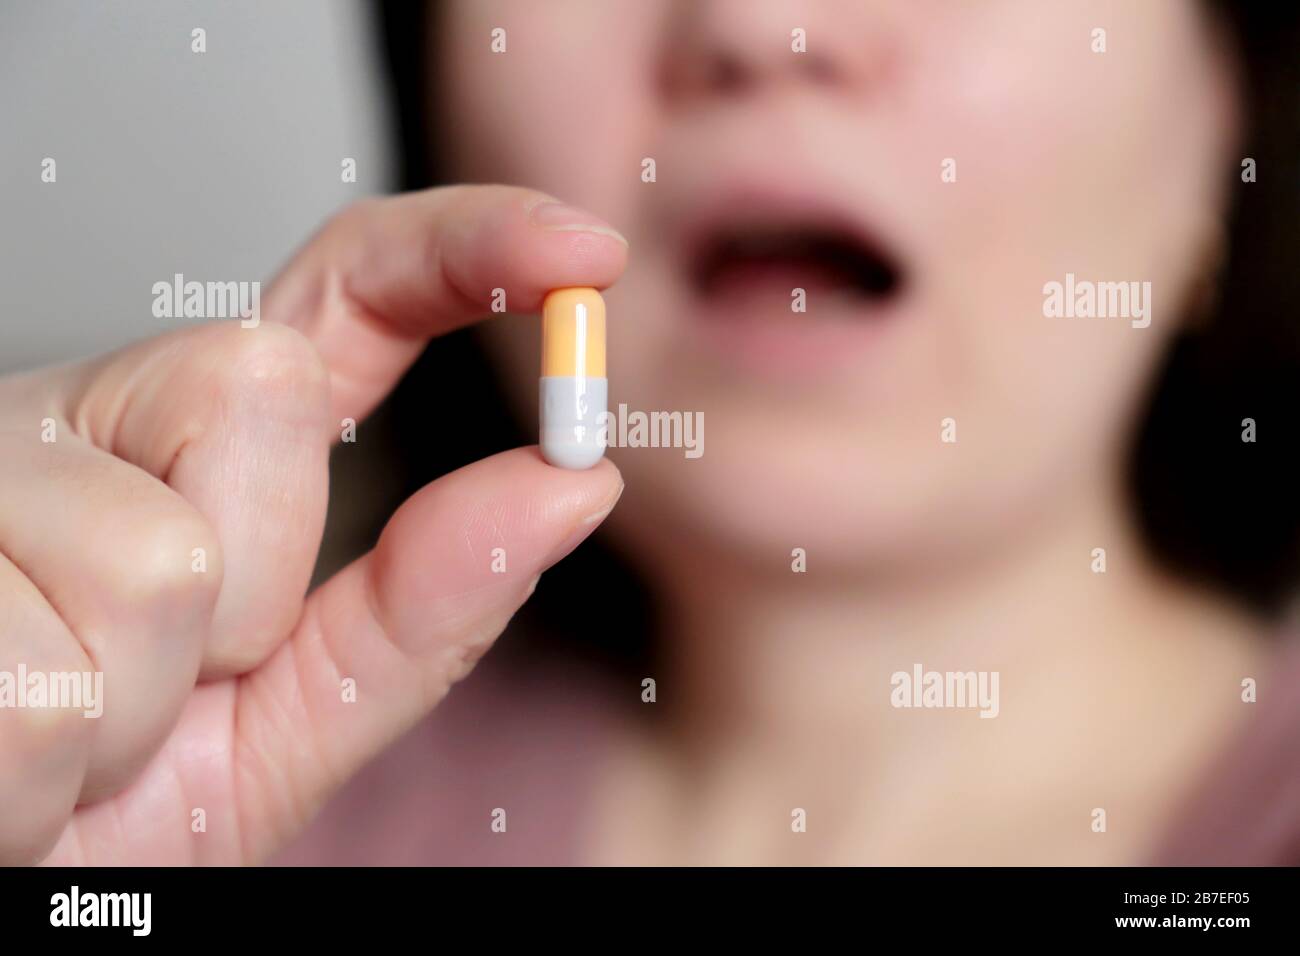 Woman takes a pill, girl putting capsule in open mouth. Sick female taking medicines, concept of antibiotic, vitamin, coronavirus prevention Stock Photo